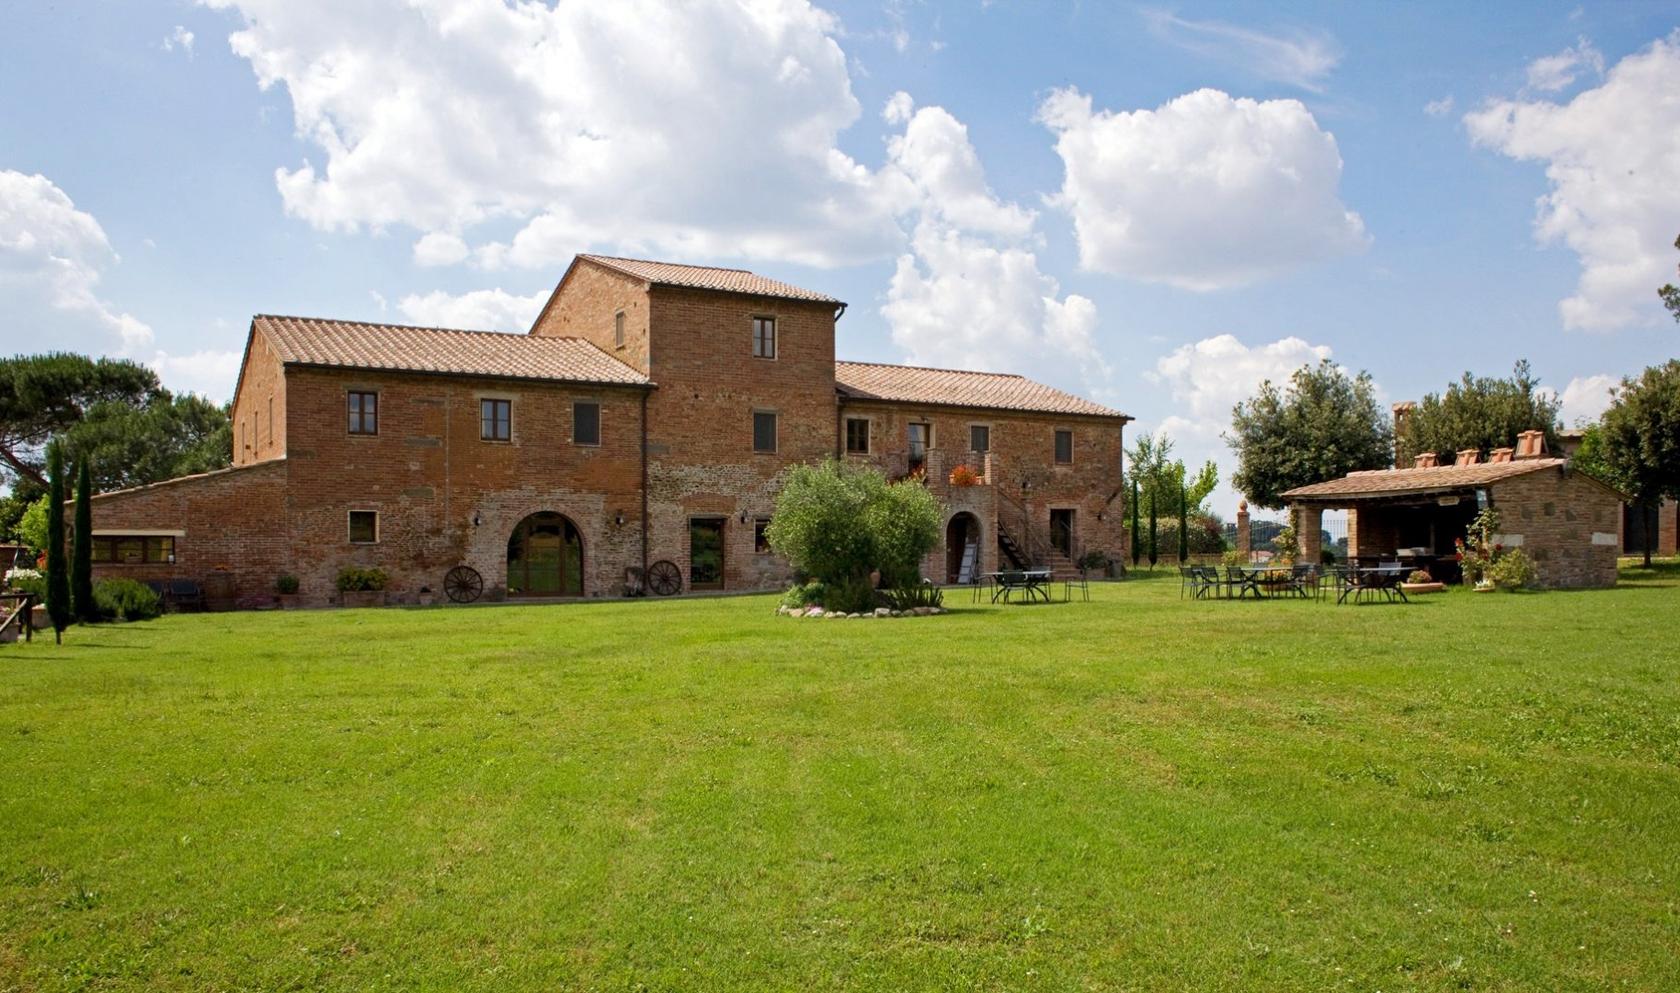 Toscana Immobiliare - Front view of the Holiday farm estate on sale in Sinalunga, Siena.